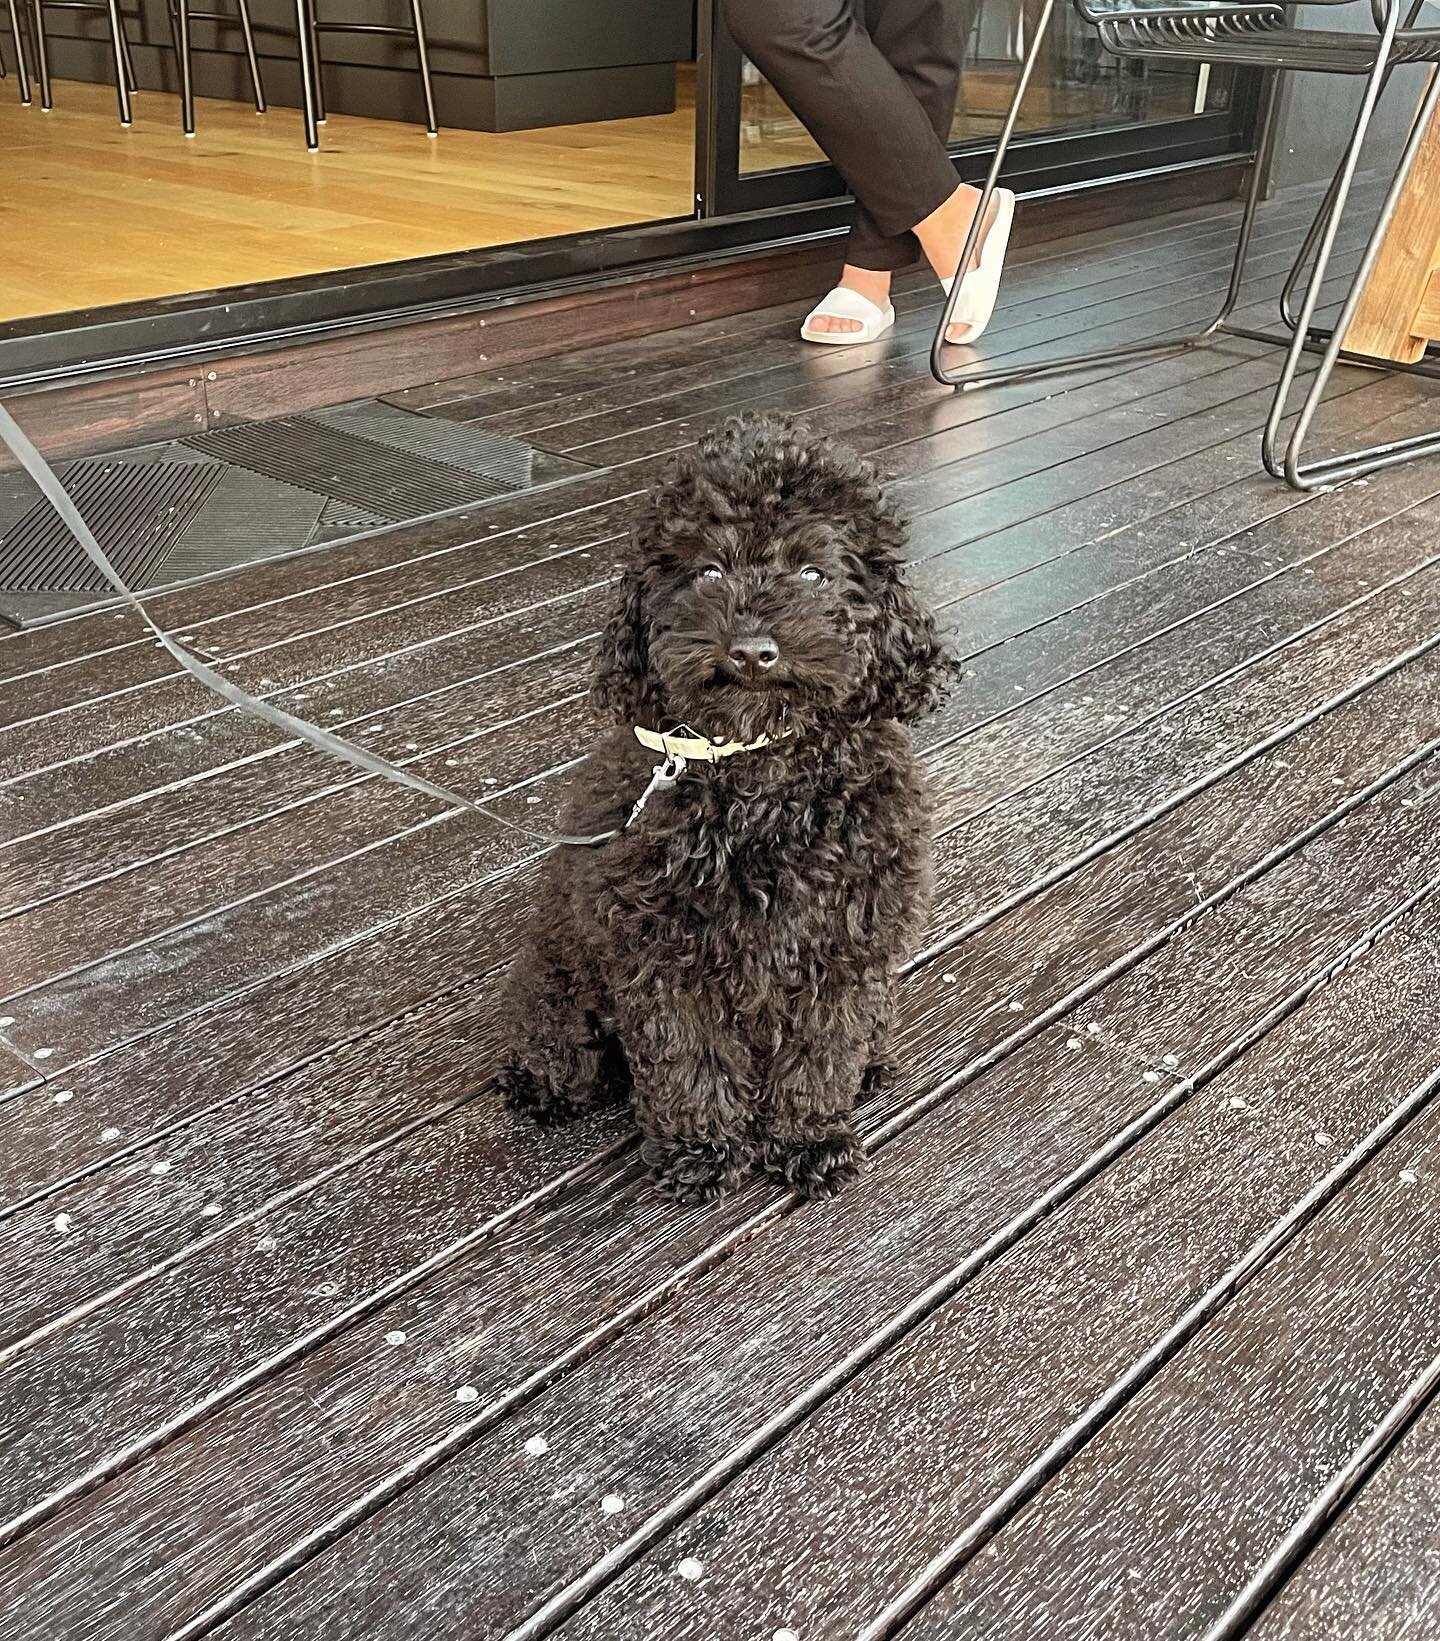 Meet Alfie the 12 week old Toy Poodle 💛
Today Alfie learnt a bed command, a back door boundary, a sit &amp; sit step away. Go Alfie 🥳